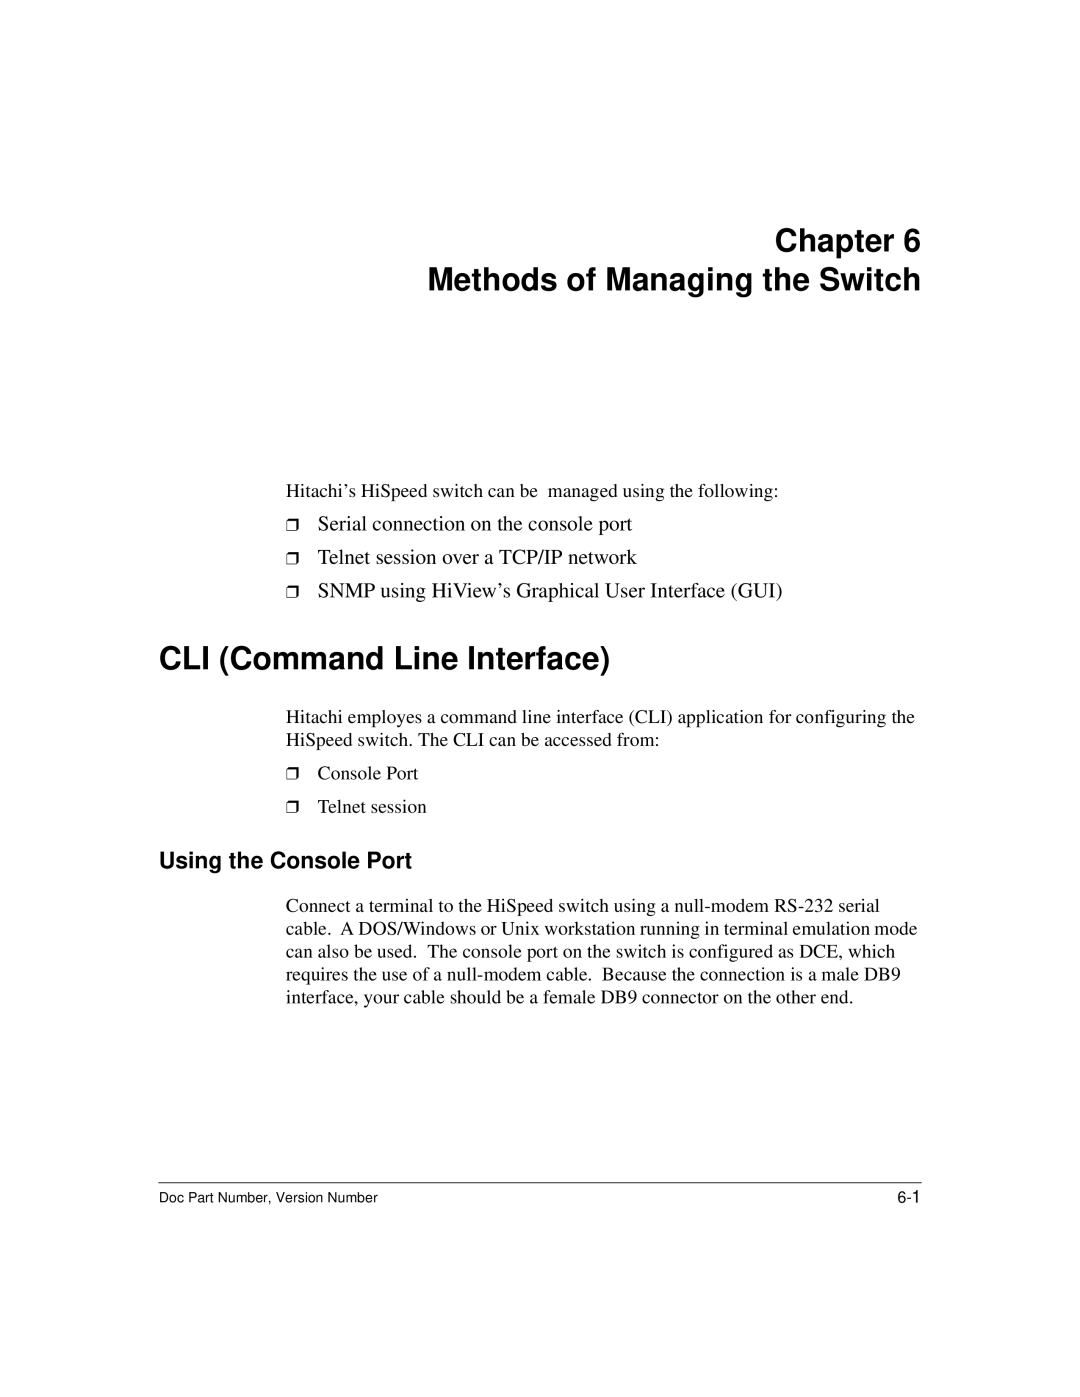 Hitachi US7070447-001 manual Chapter Methods of Managing the Switch, CLI Command Line Interface, Using the Console Port 